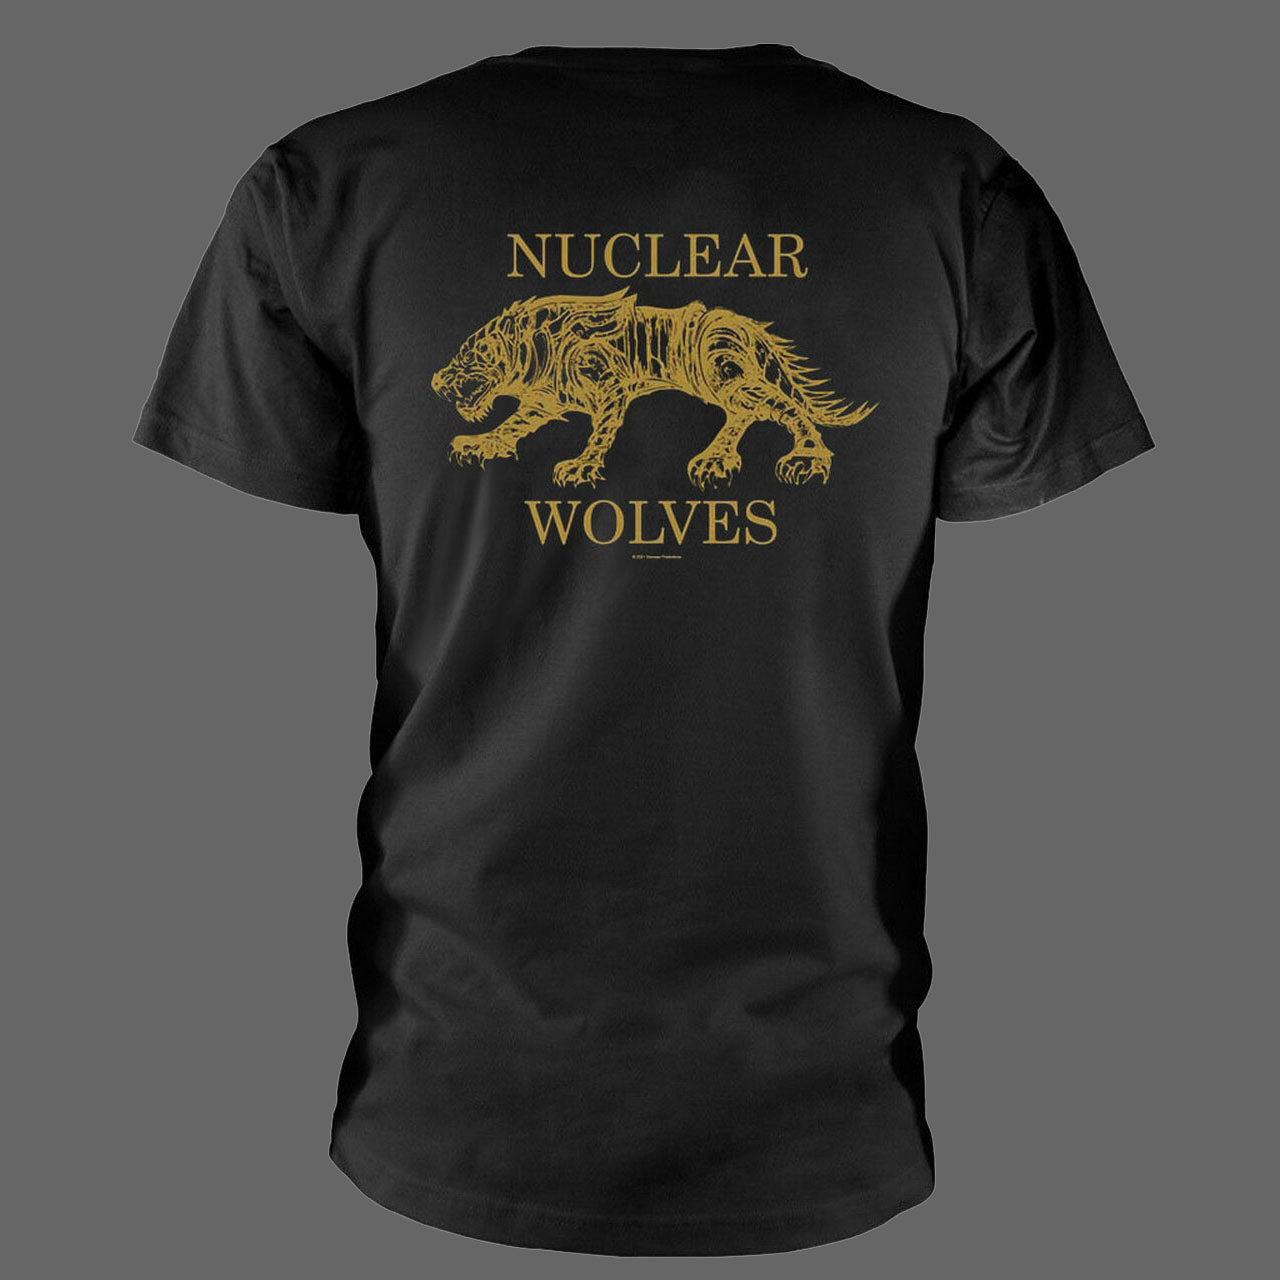 Diocletian - Nuclear Wolves (T-Shirt)